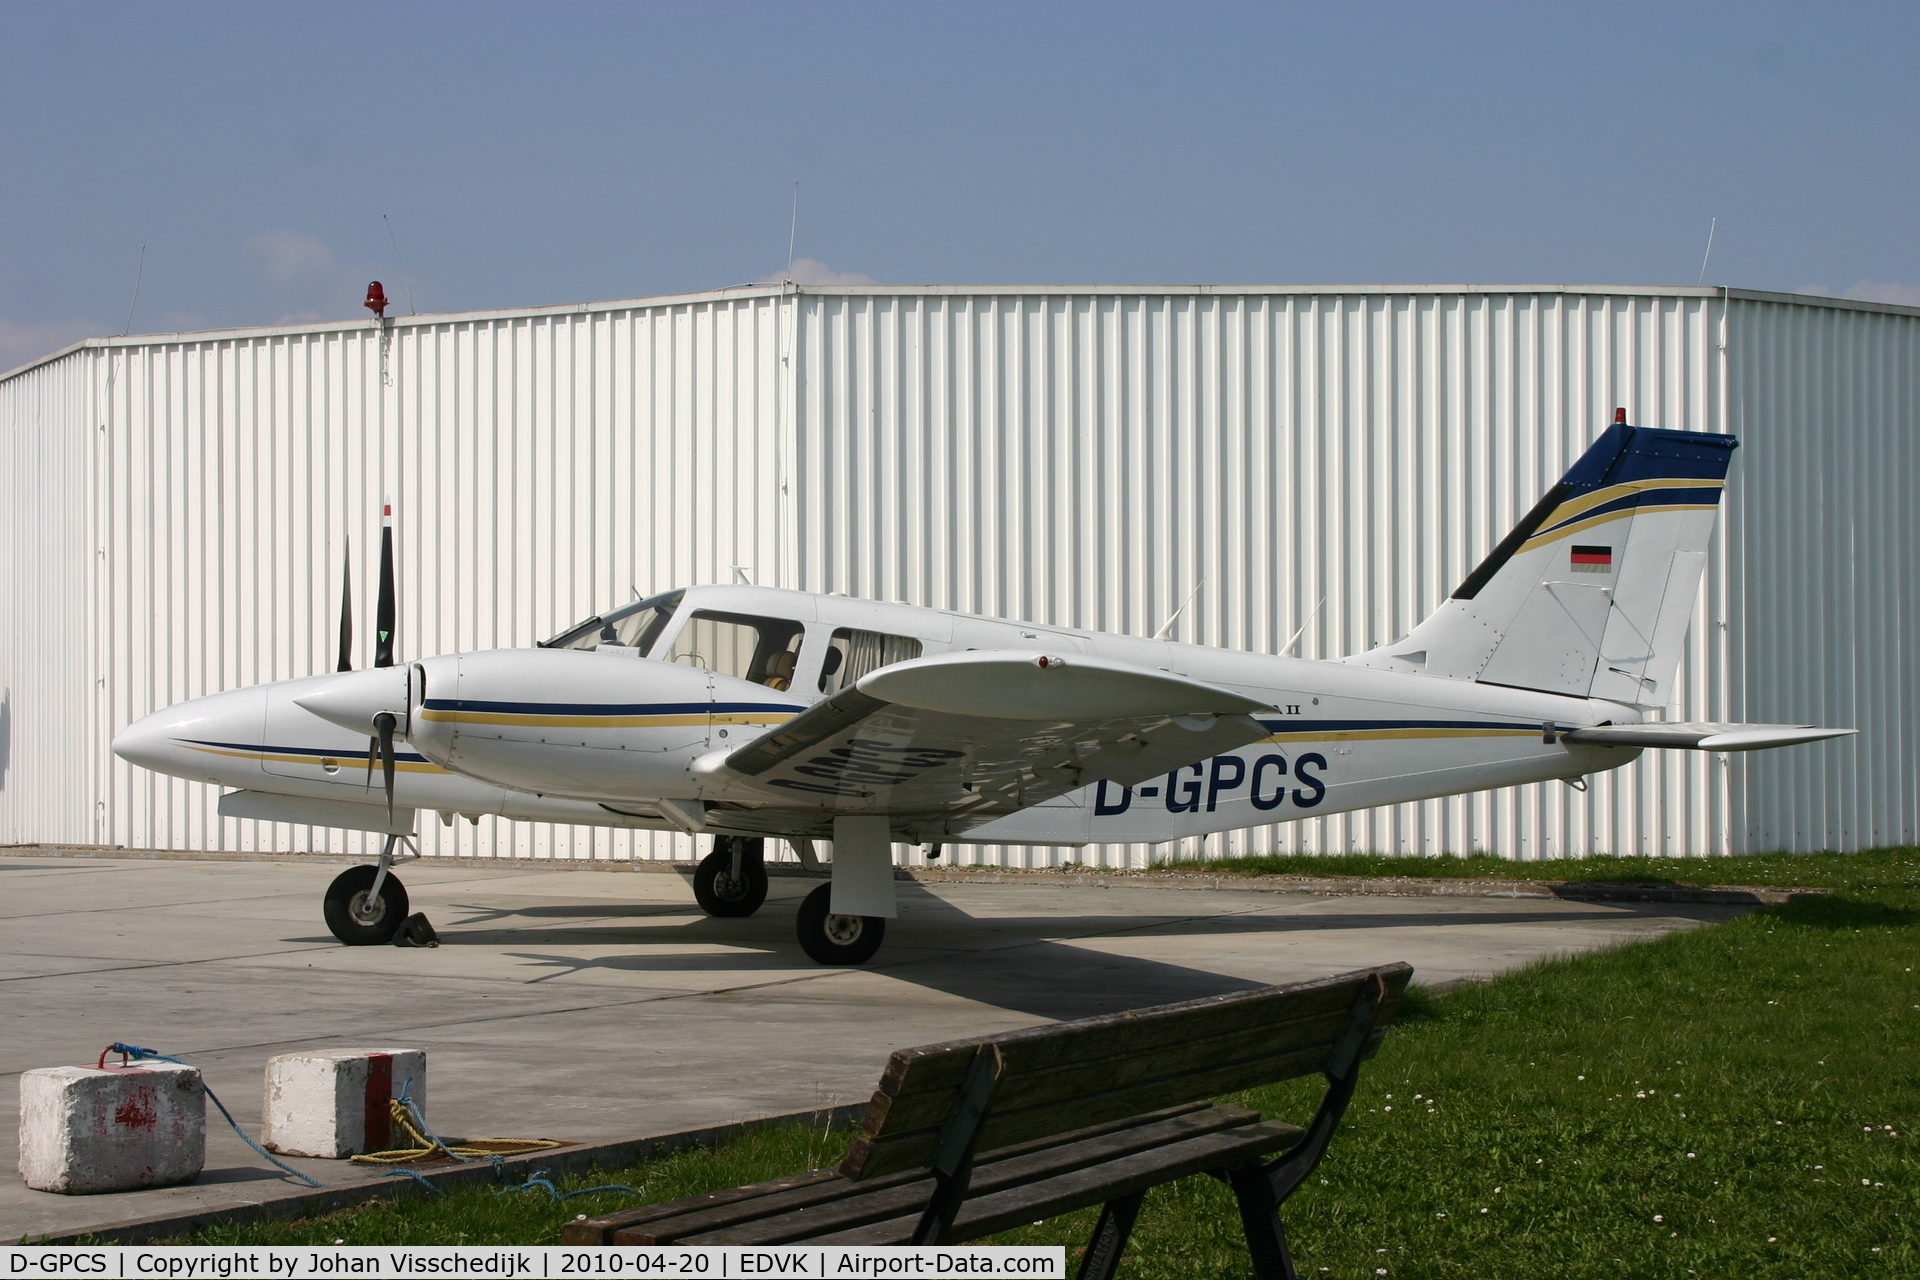 D-GPCS, 1980 Piper PA-34-200T Seneca II C/N 34-8070261, Previous ID N8231H, came to Germany in 2000